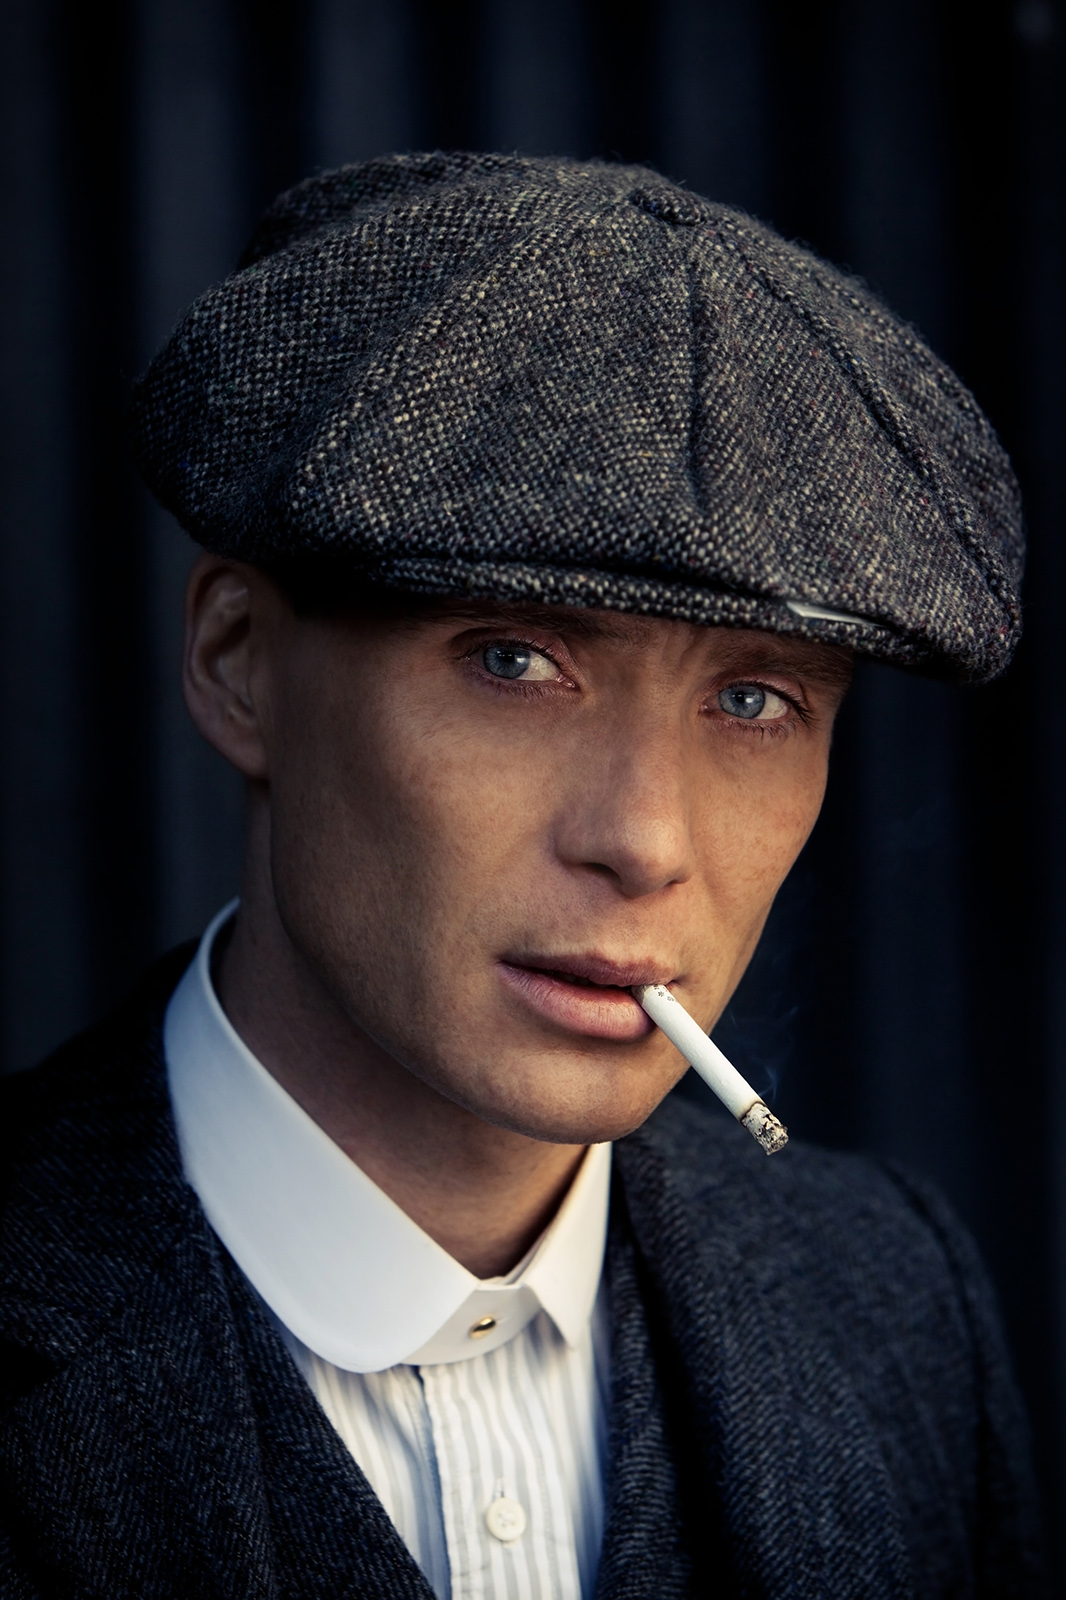 Peaky Blinder S Star Cillian Murphy Reveals Tommy Shelby S Backstory In My Xxx Hot Girl 